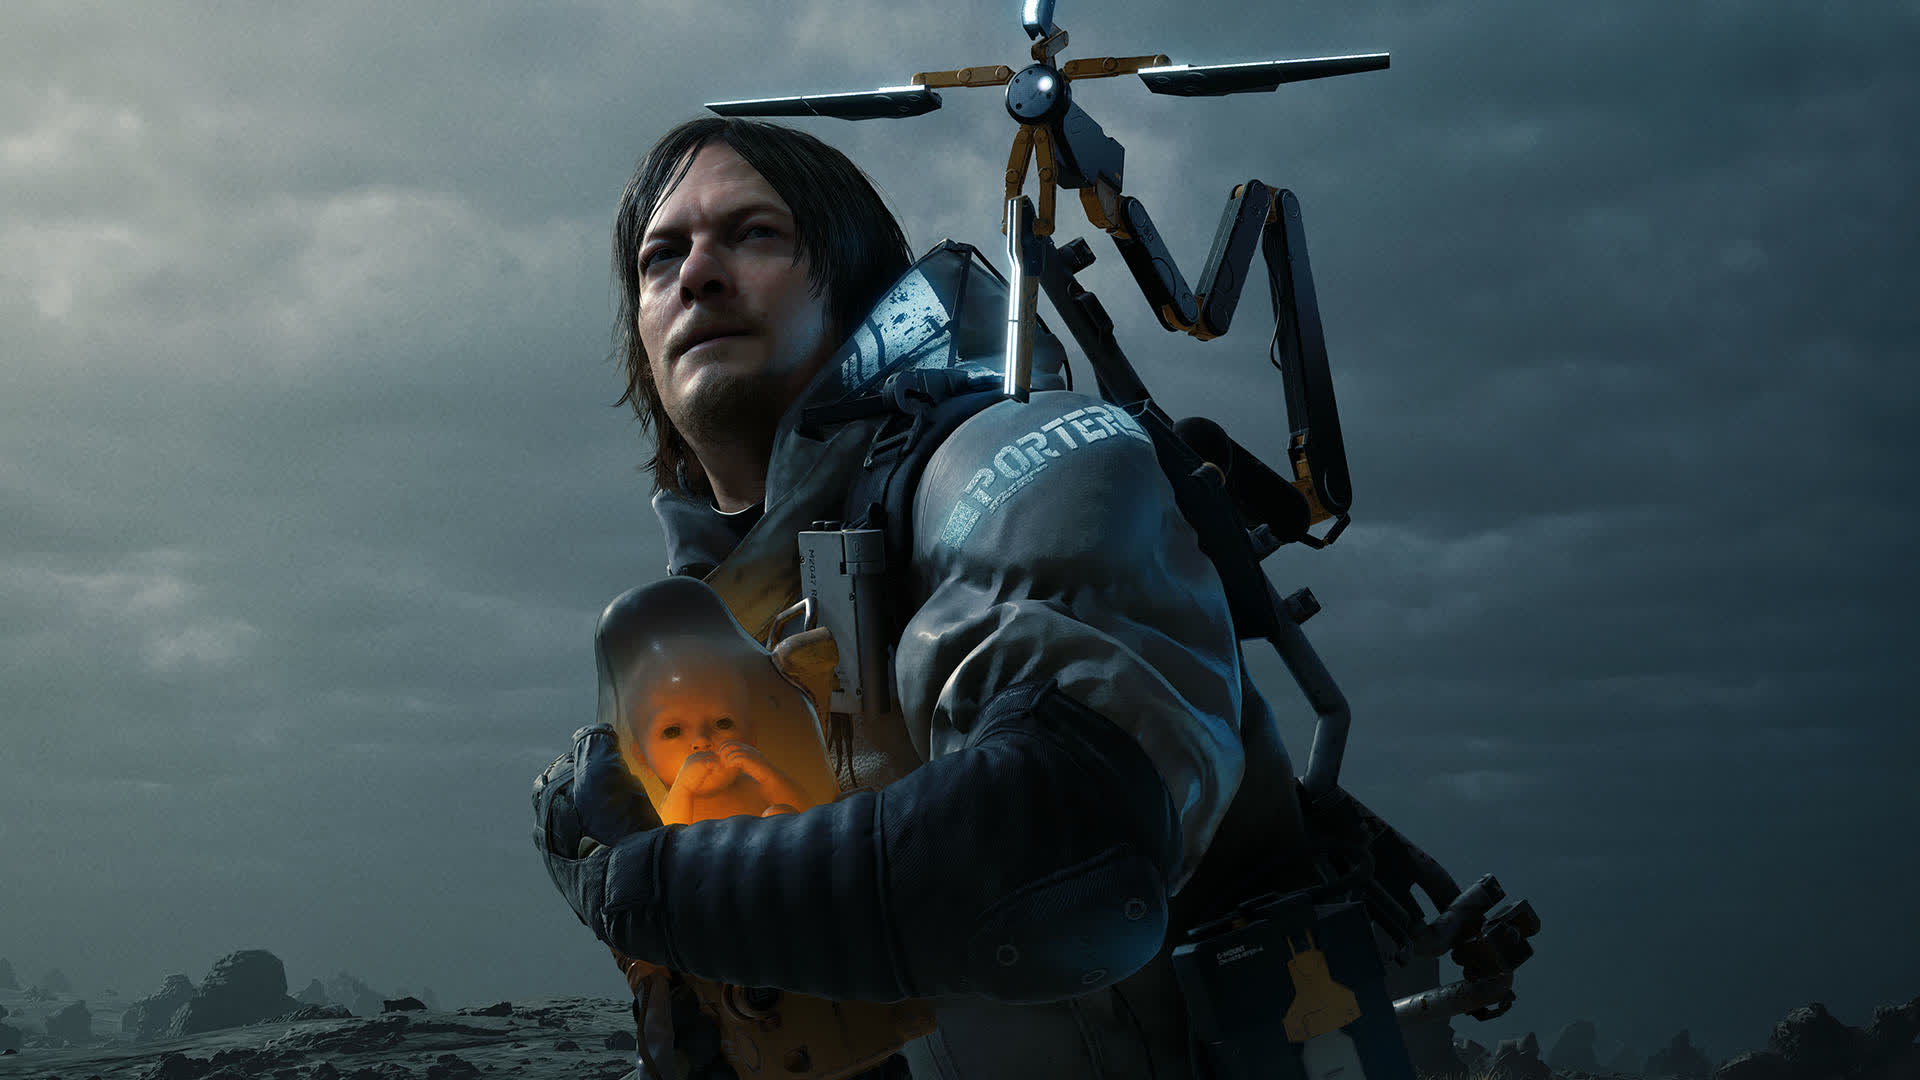 Grab a free copy of Death Stranding for a limited time